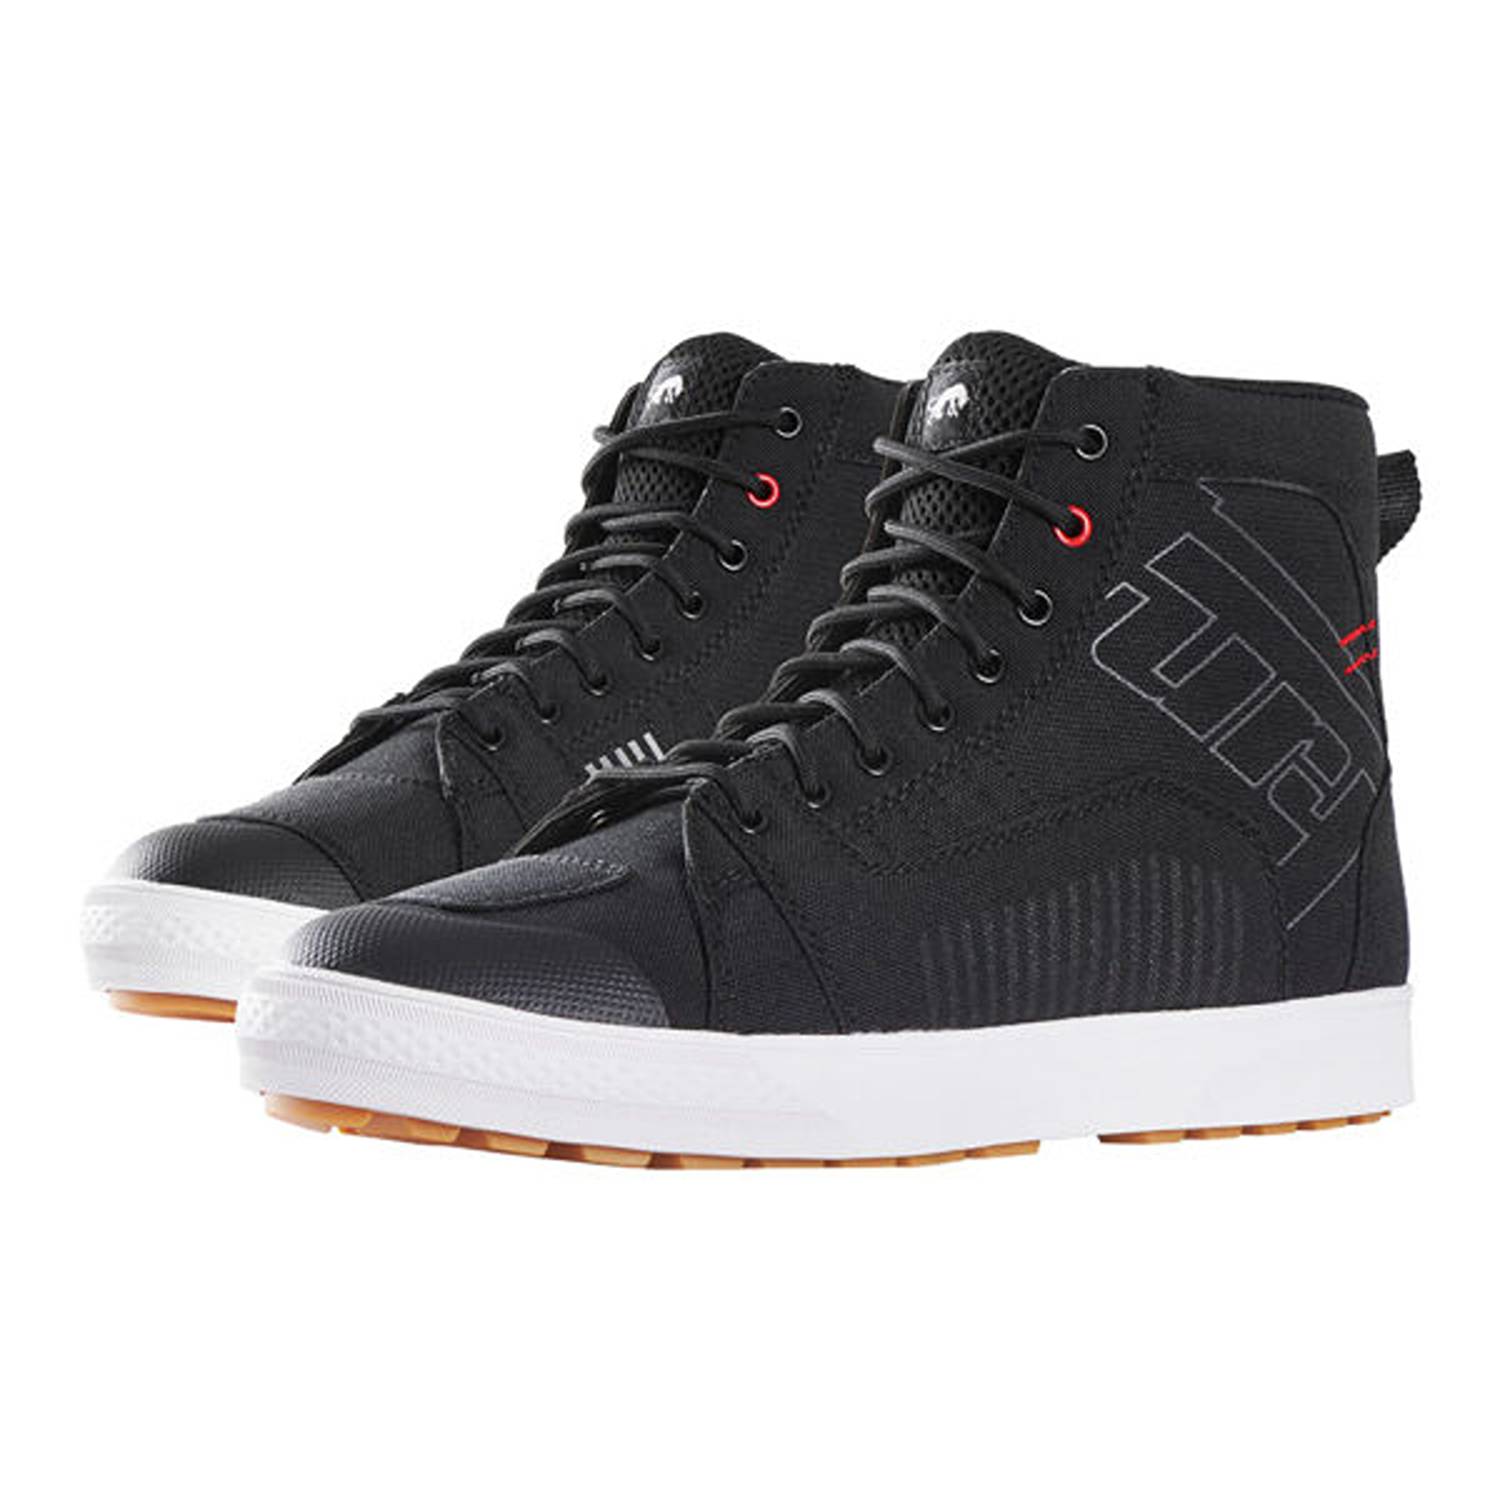 Image of EU Furygan Stockton Air D30 Shoes Black Red Taille 46